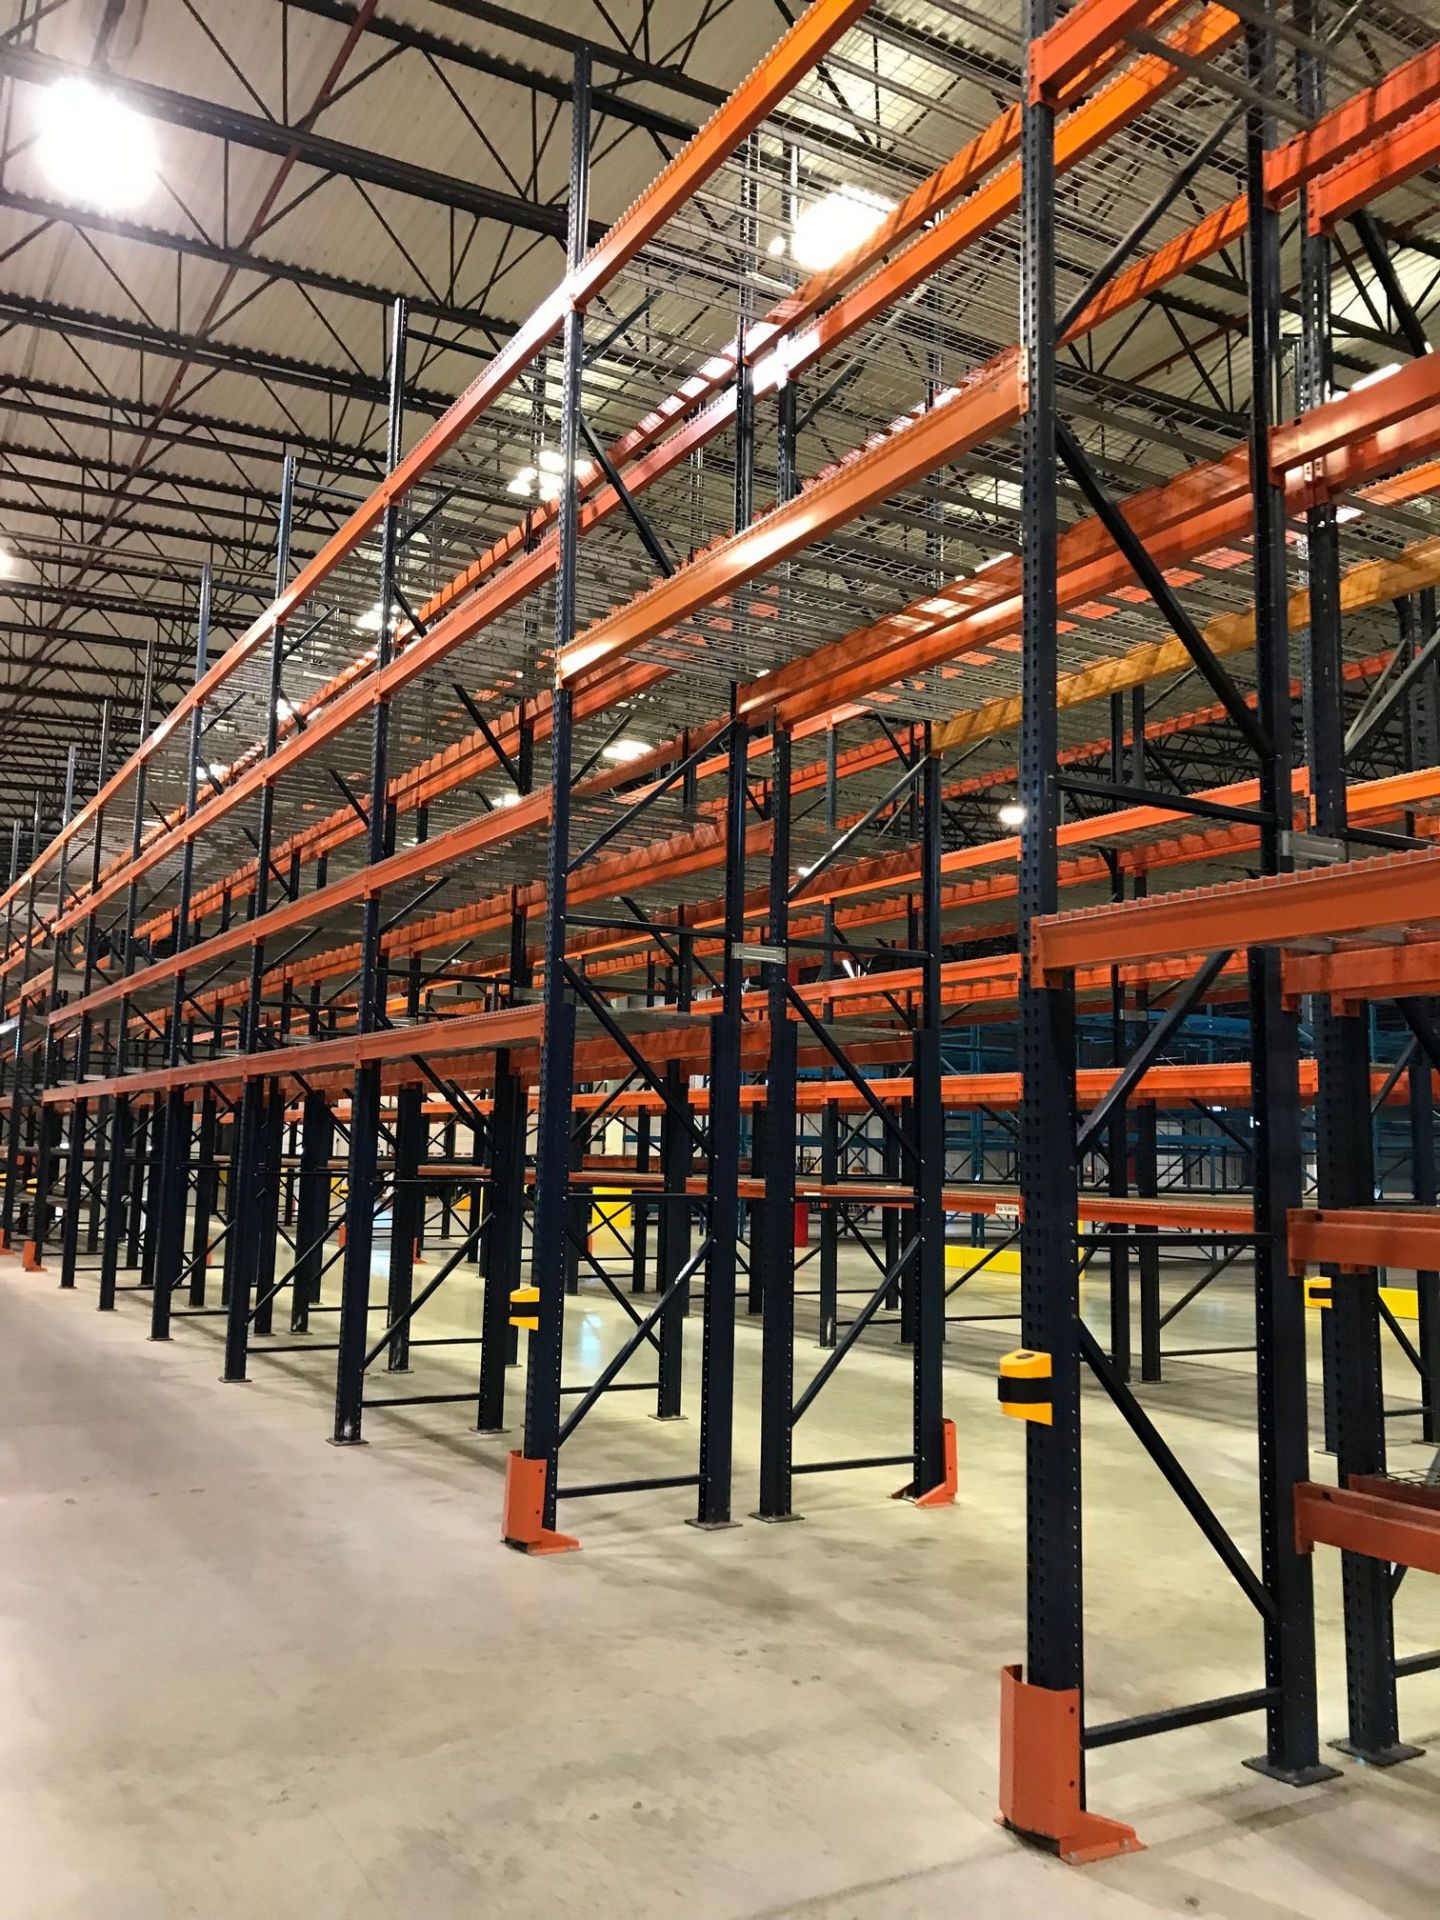 SECTIONS 60" X 108" X 288" TEARDROP TYPE ADJUSTABLE BEAM PALLET RACK WITH WIRE DECKING, 6" HIGH - Image 7 of 14